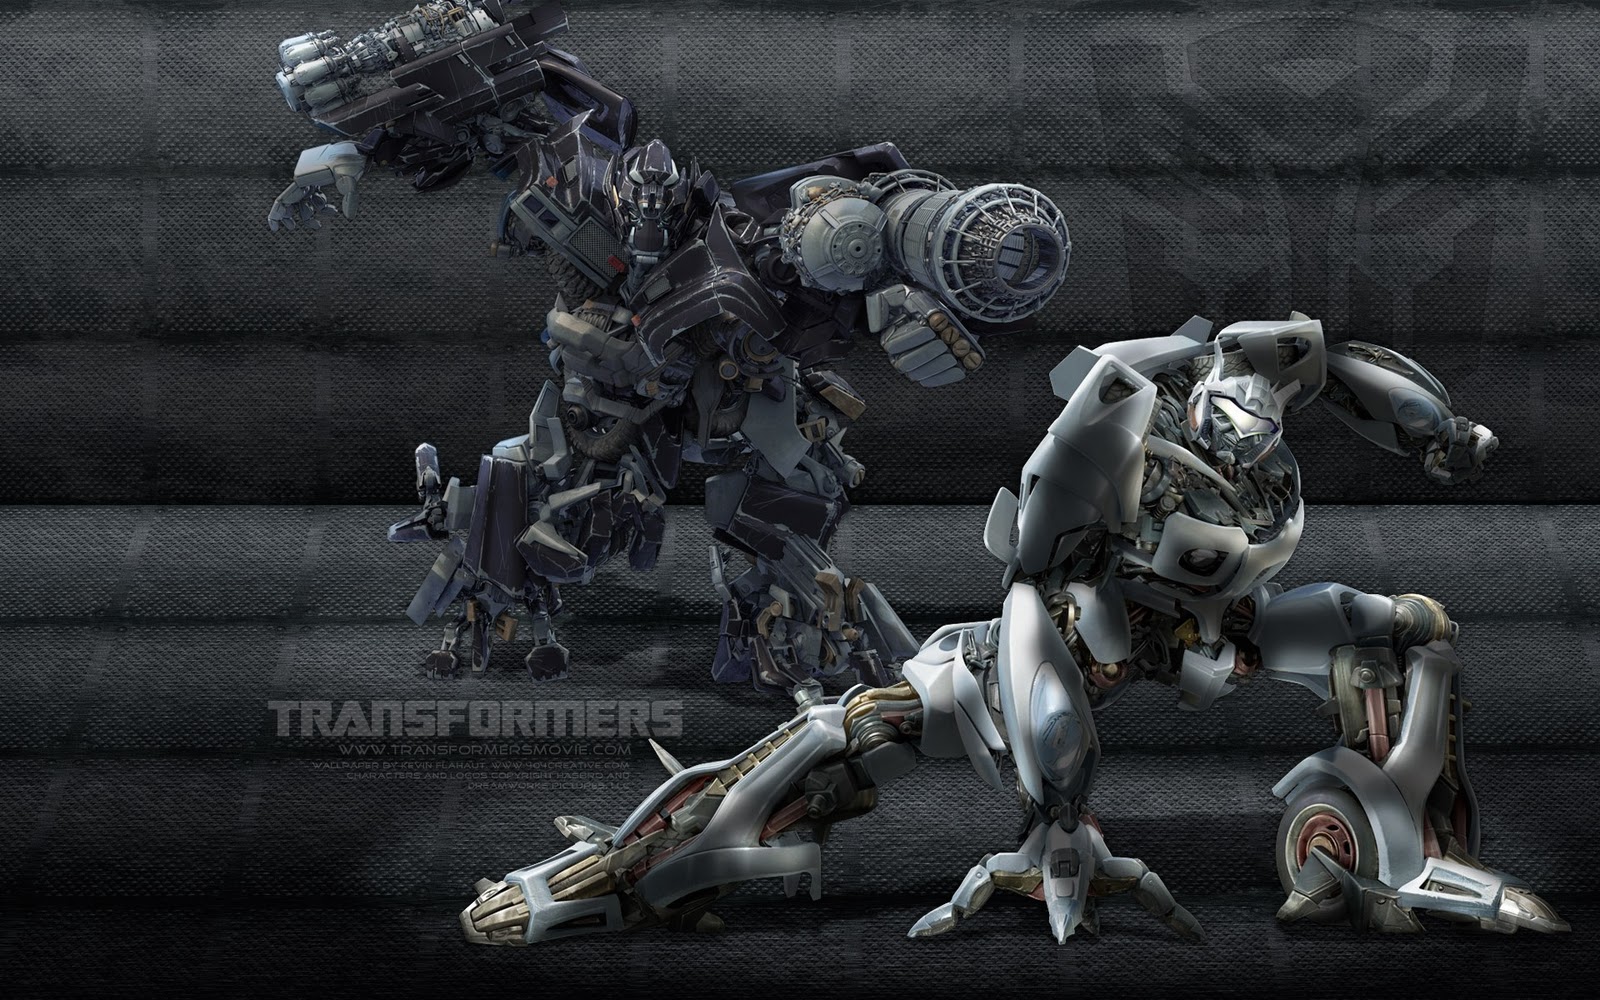 transformers hd wallpapers,mecha,action adventure game,pc game,games,fictional character